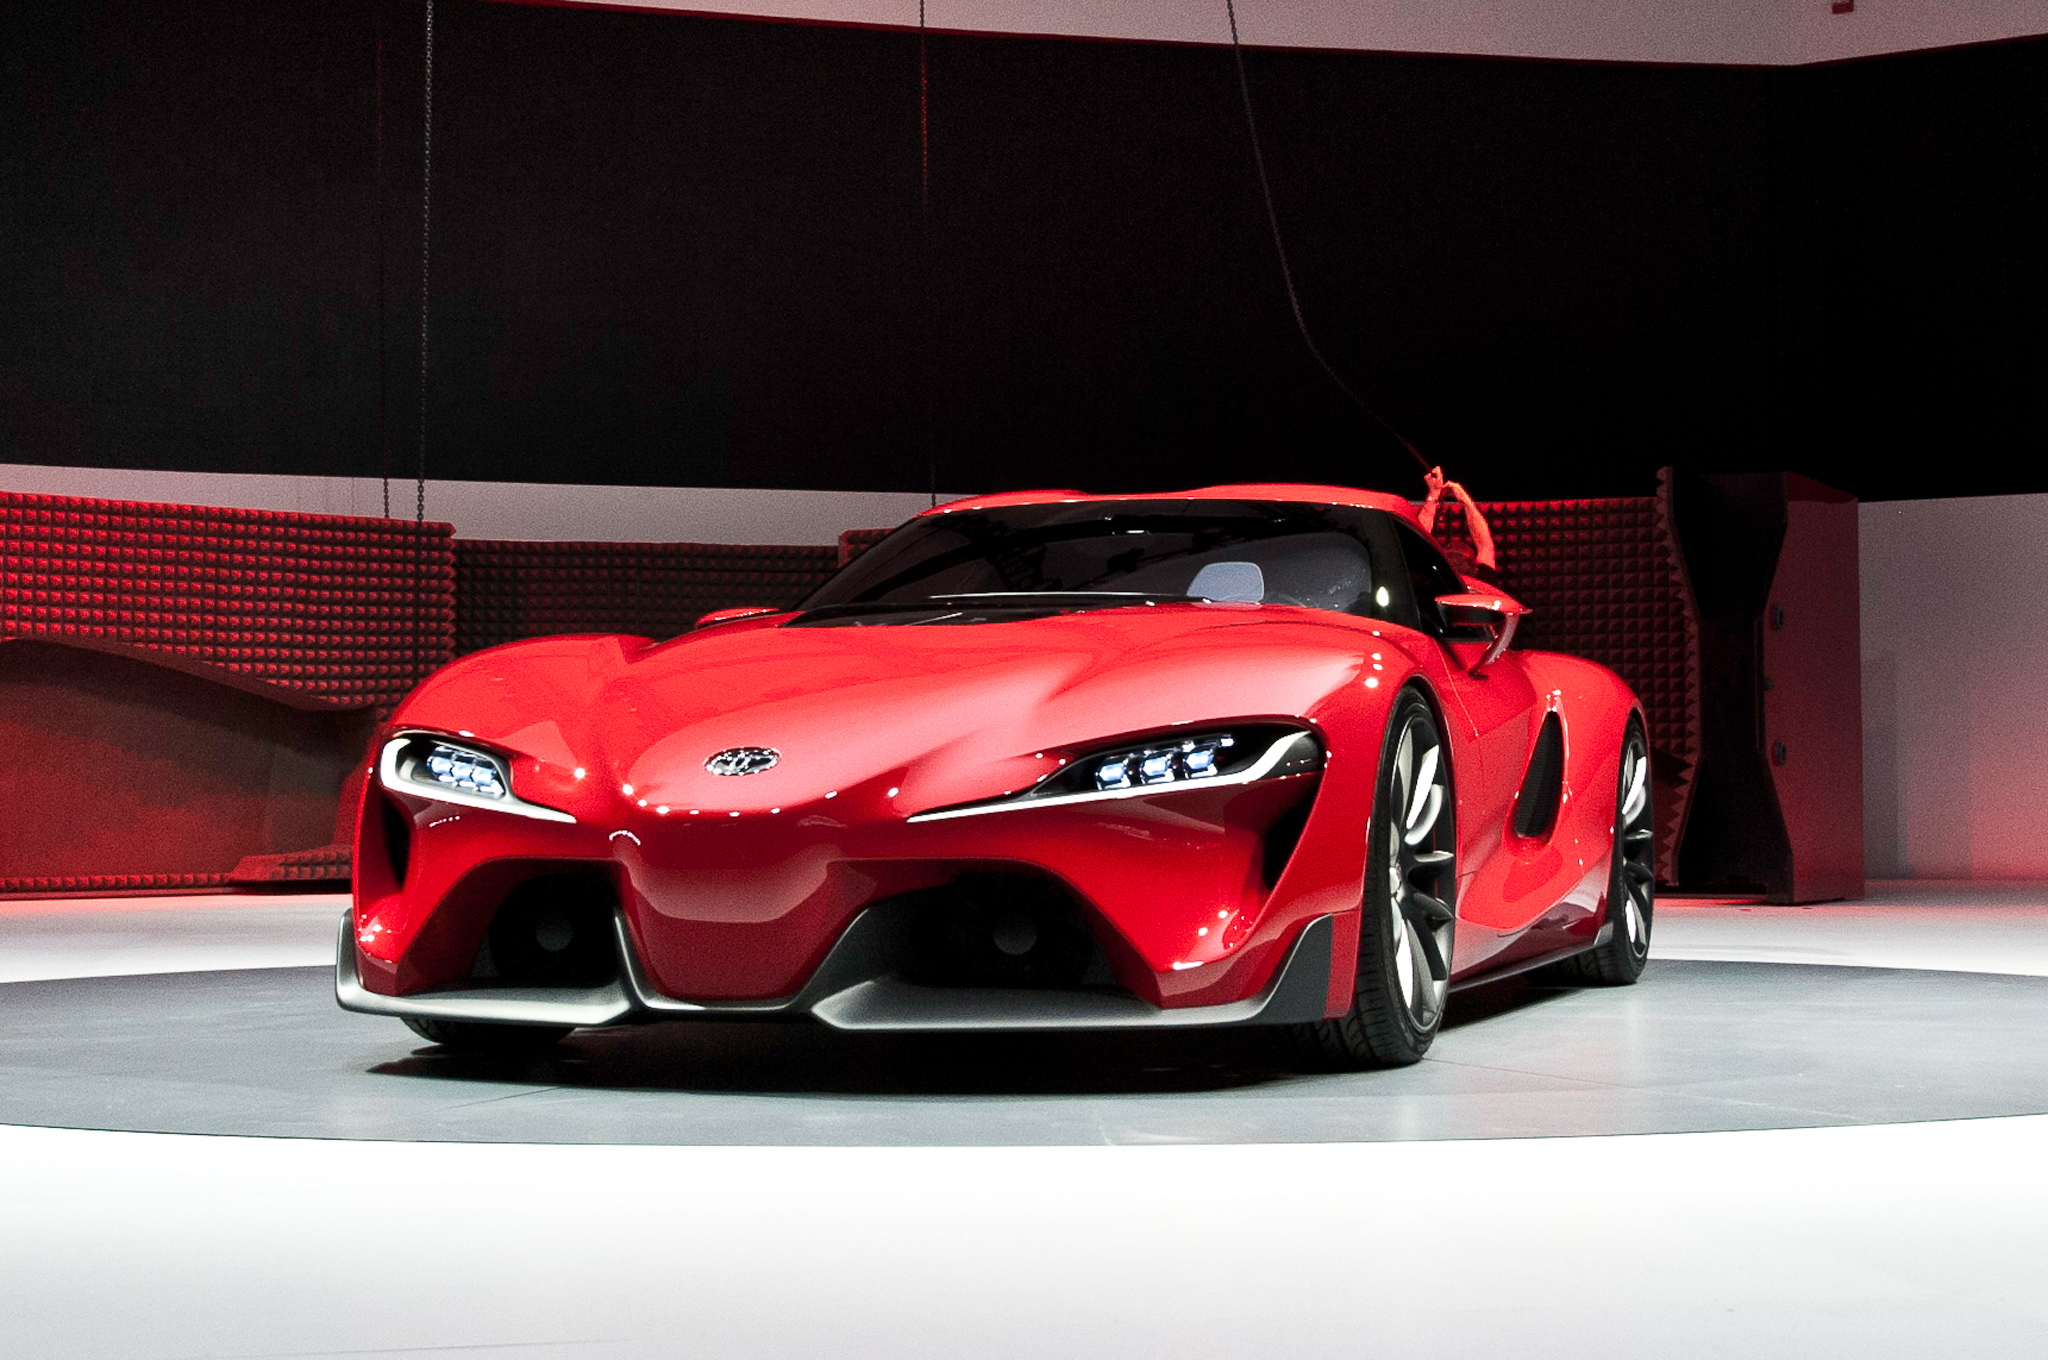 http://fncounter.files.wordpress.com/2014/03/toyota-ft-1-concept-front-end-02.jpg